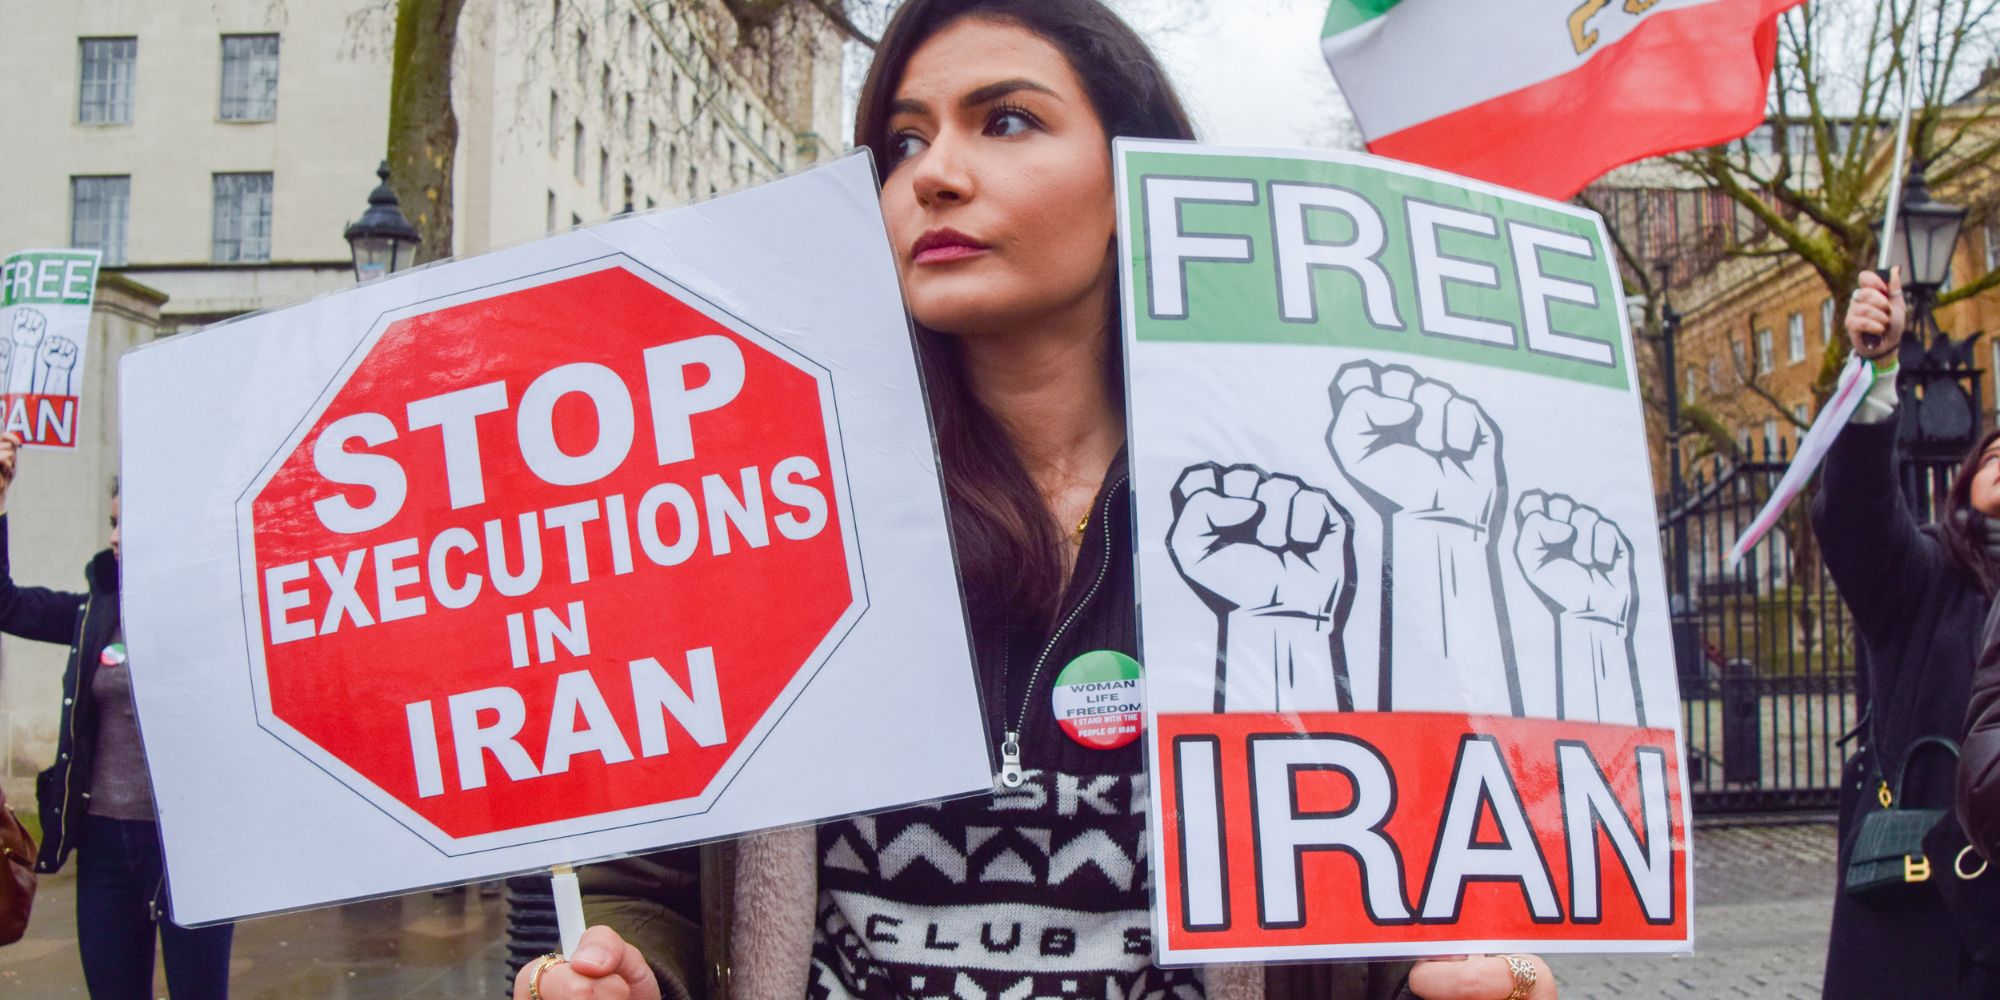 A protester holds 'Stop executions in Iran' and 'Free Iran'